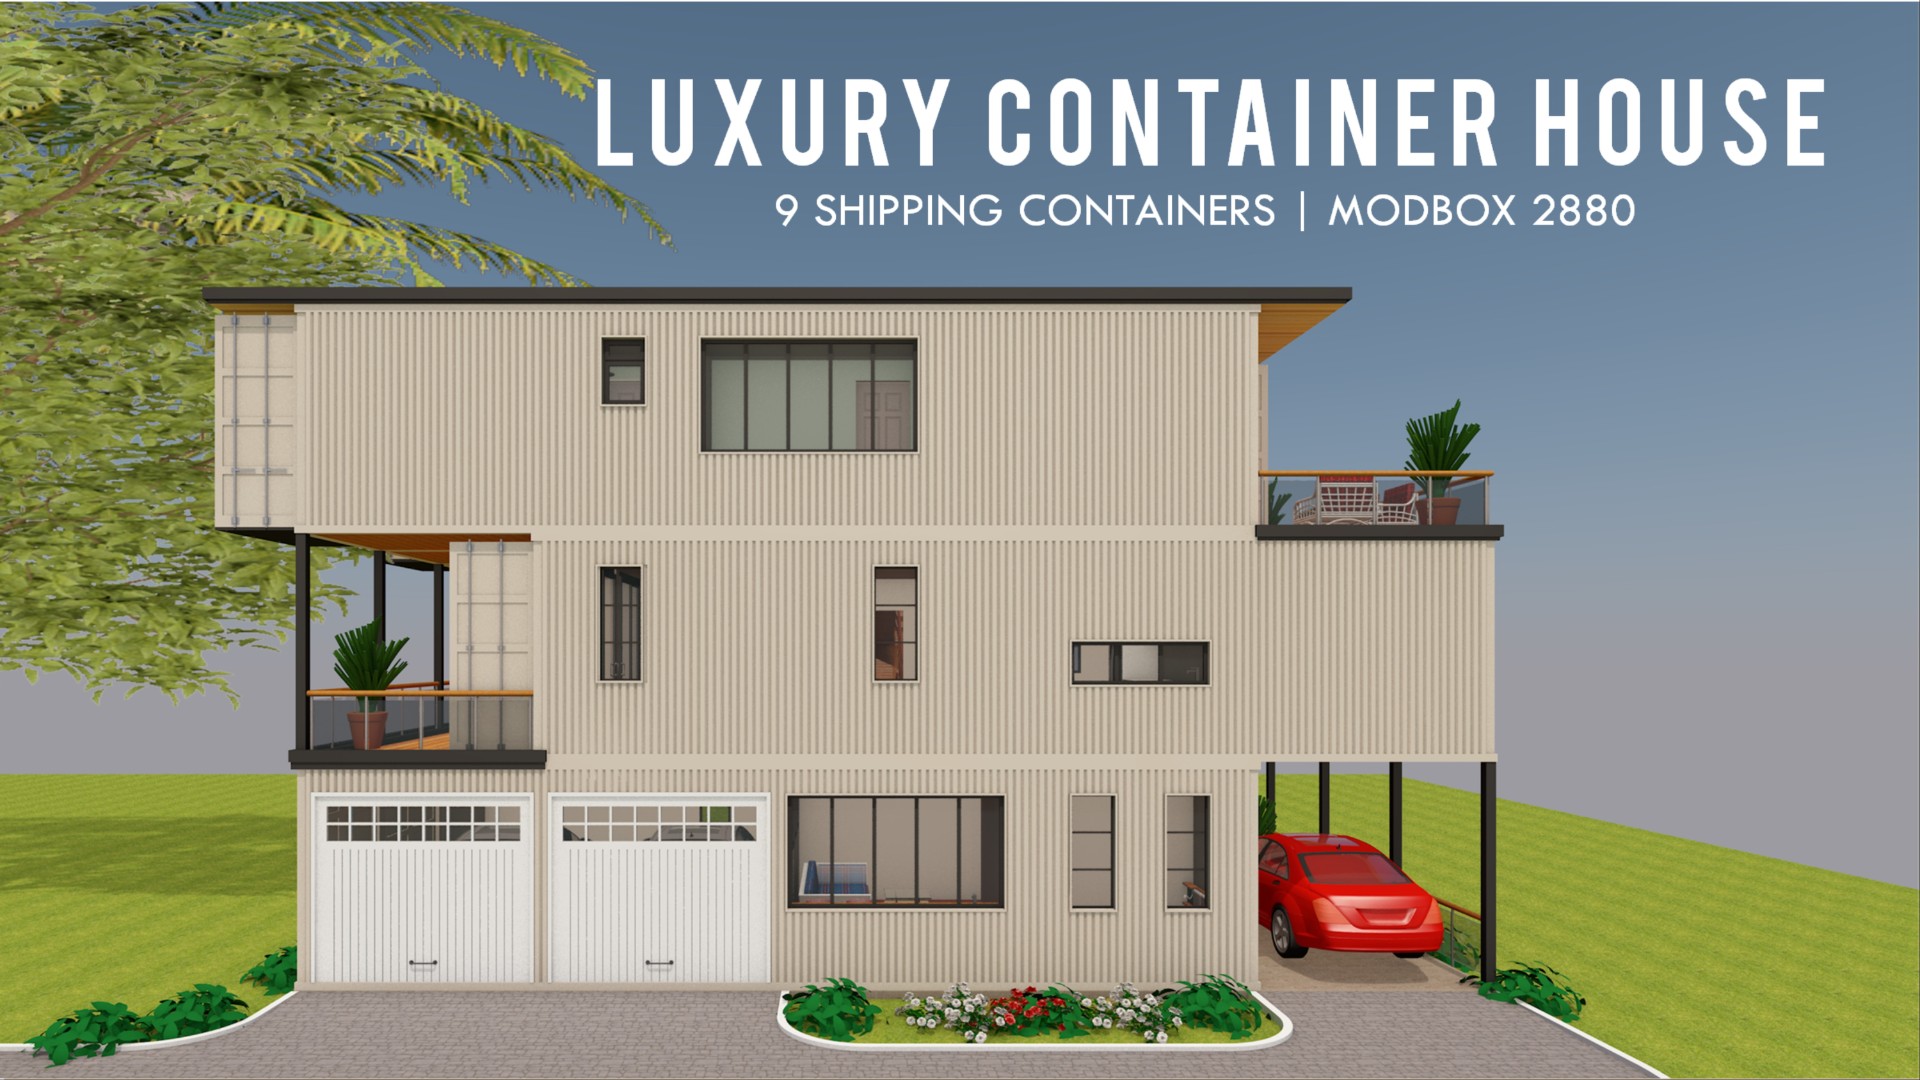 Luxury Shipping Container House Design with 3000+ Square Feet+ Floor Plans | MODBOX 2880